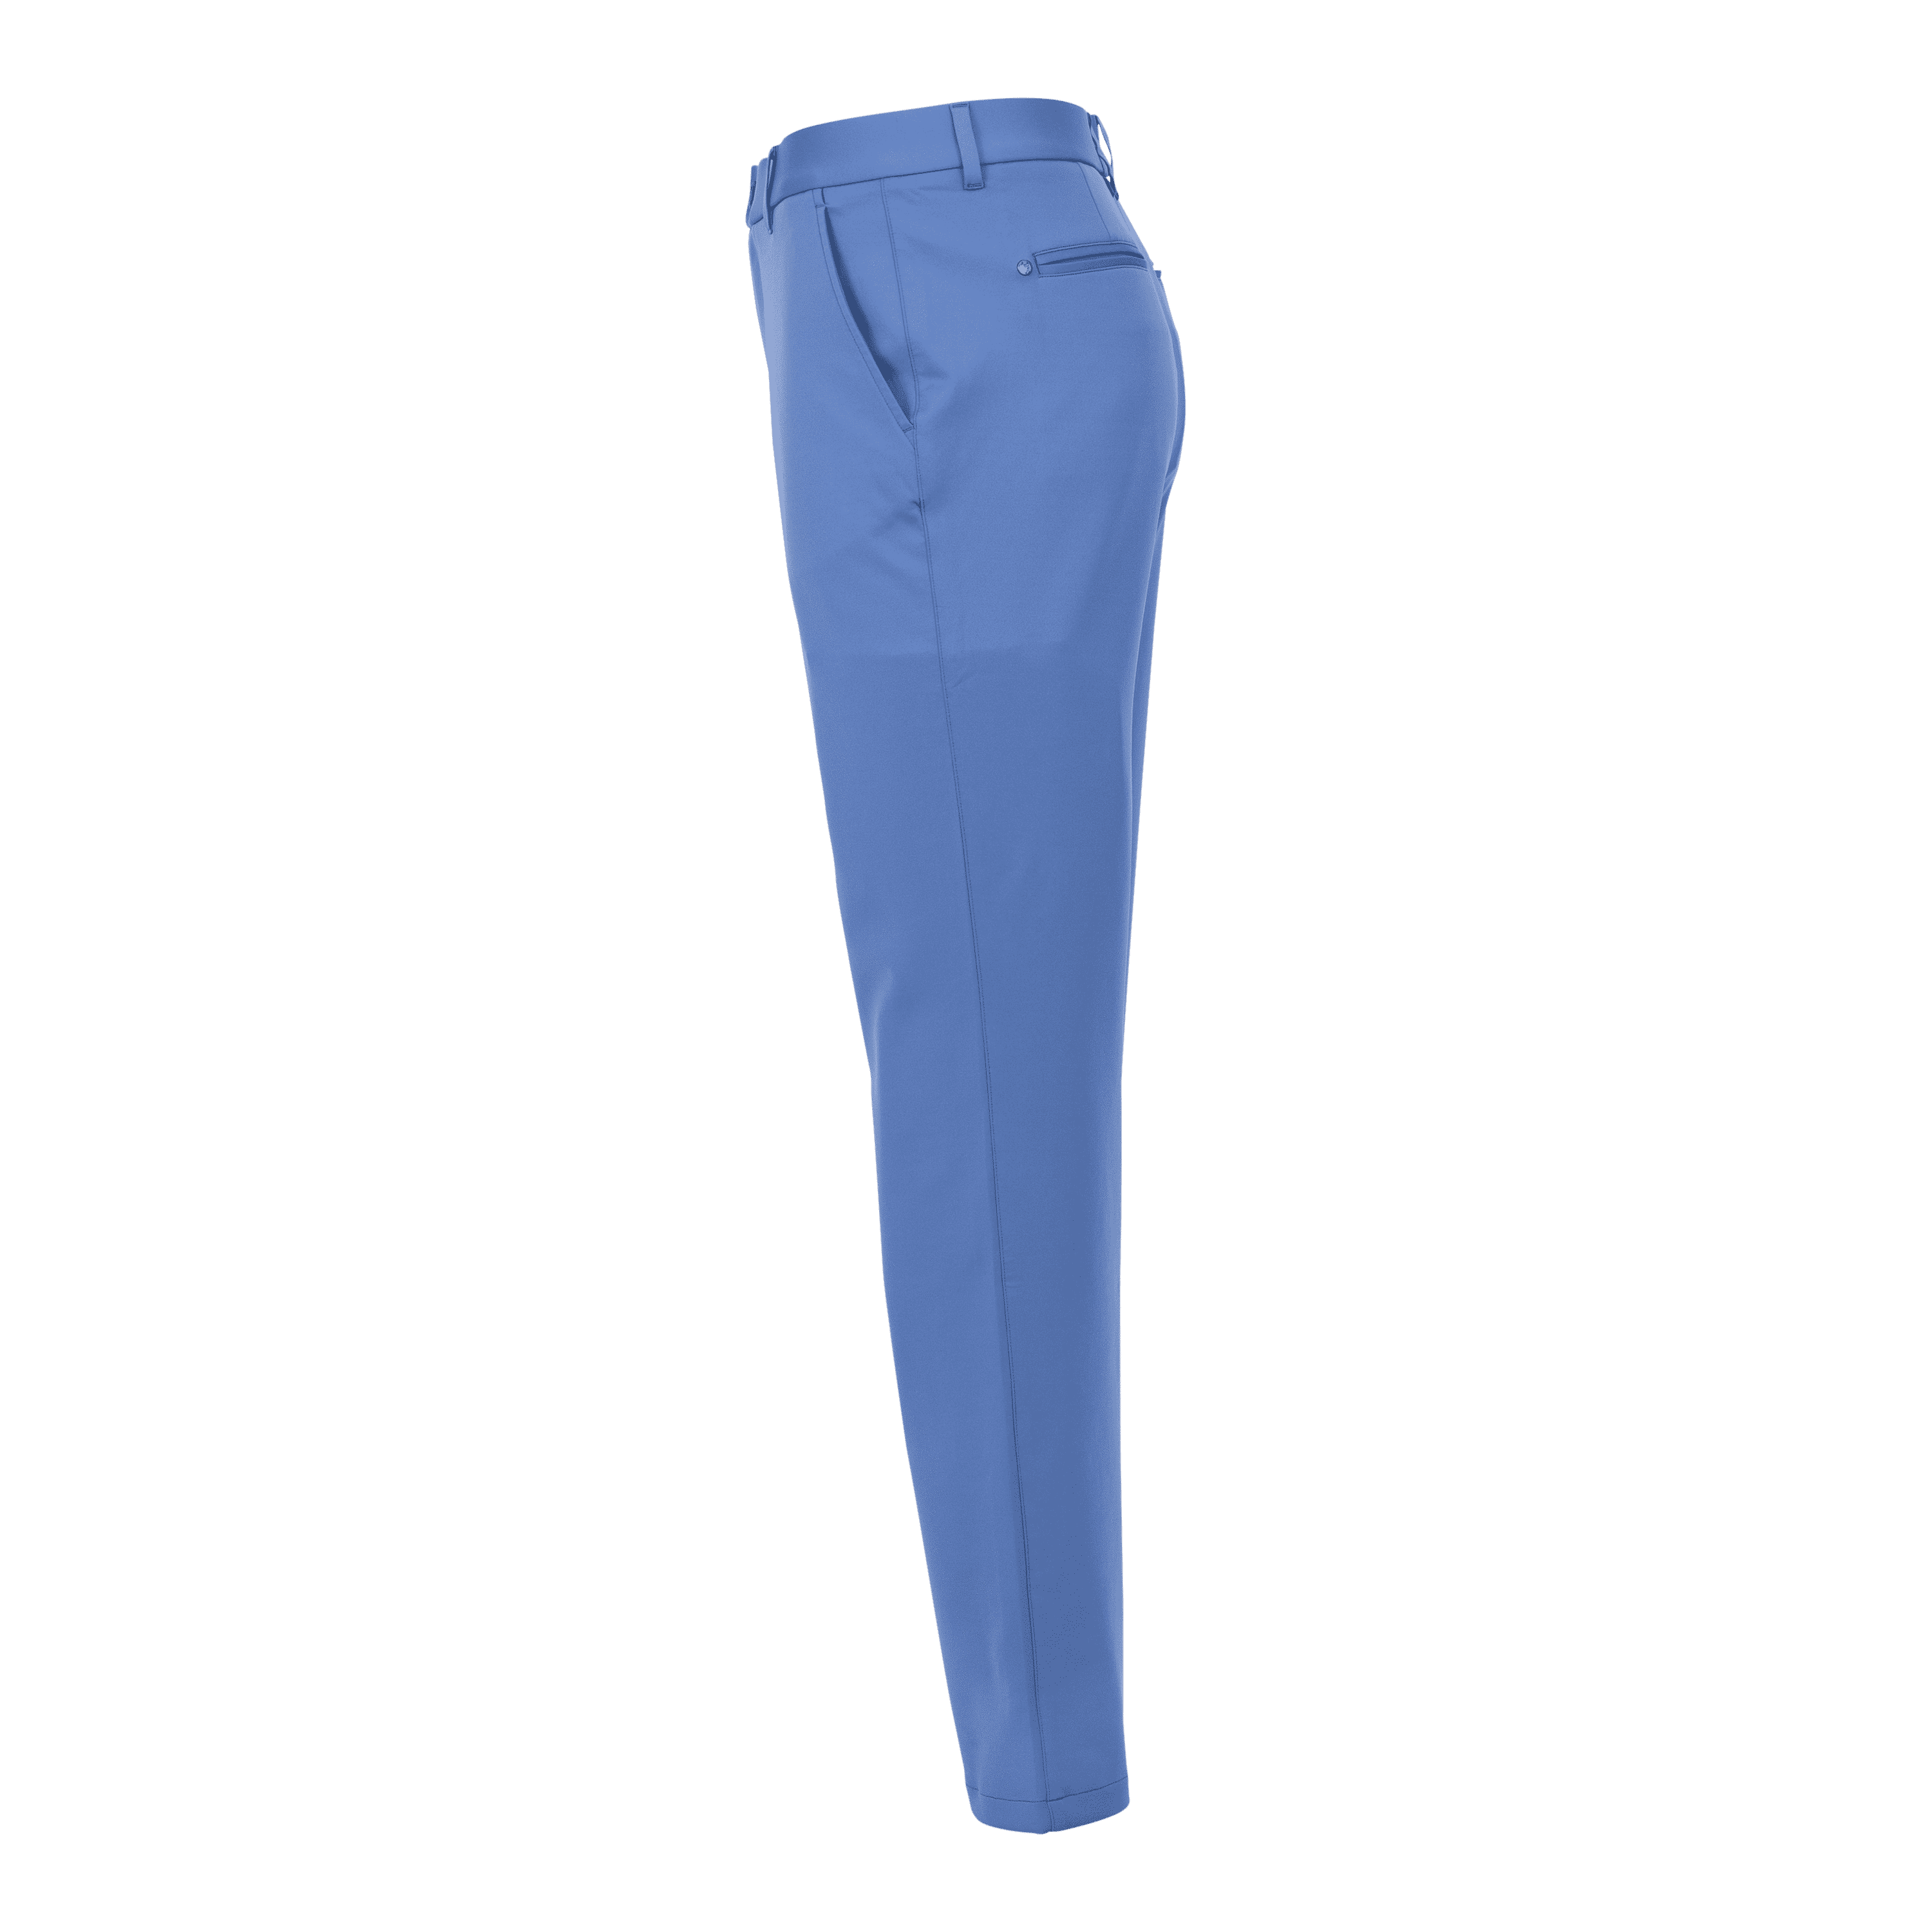 Matinique MAlas Pants in Blissful Blue – Raggs - Fashion for Men and Women